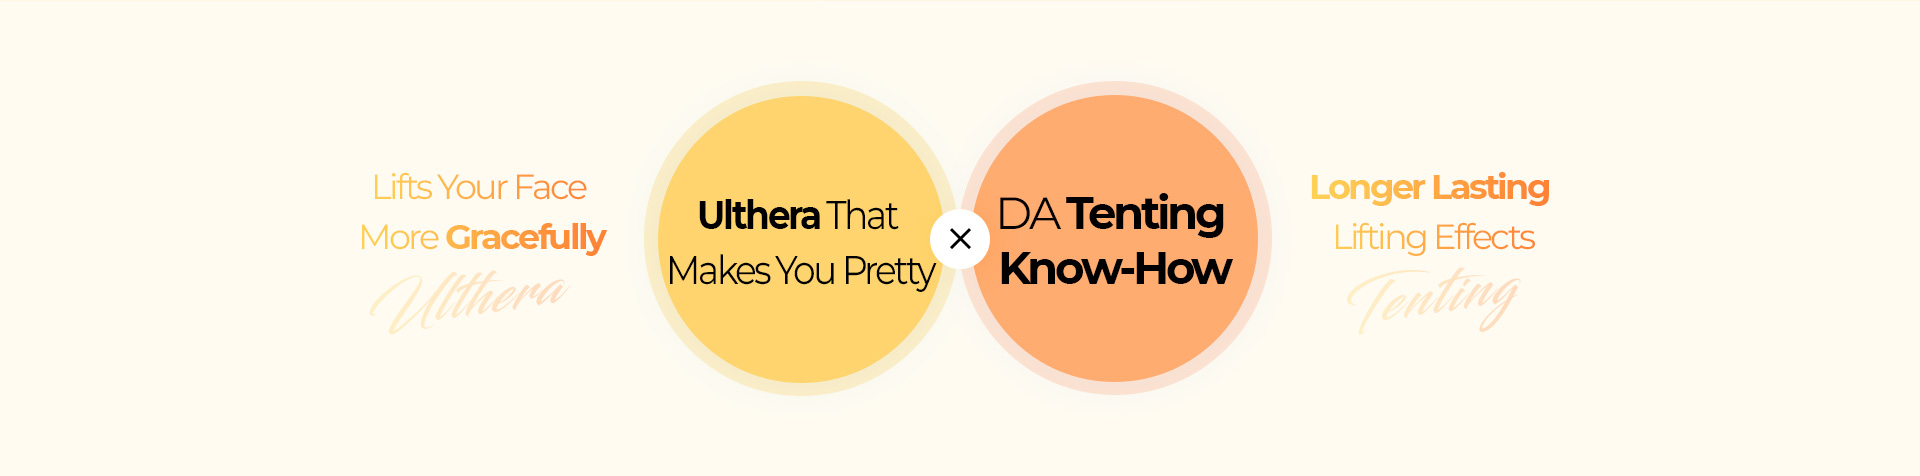 ulthera that makes you pretty & DA tenting know-how